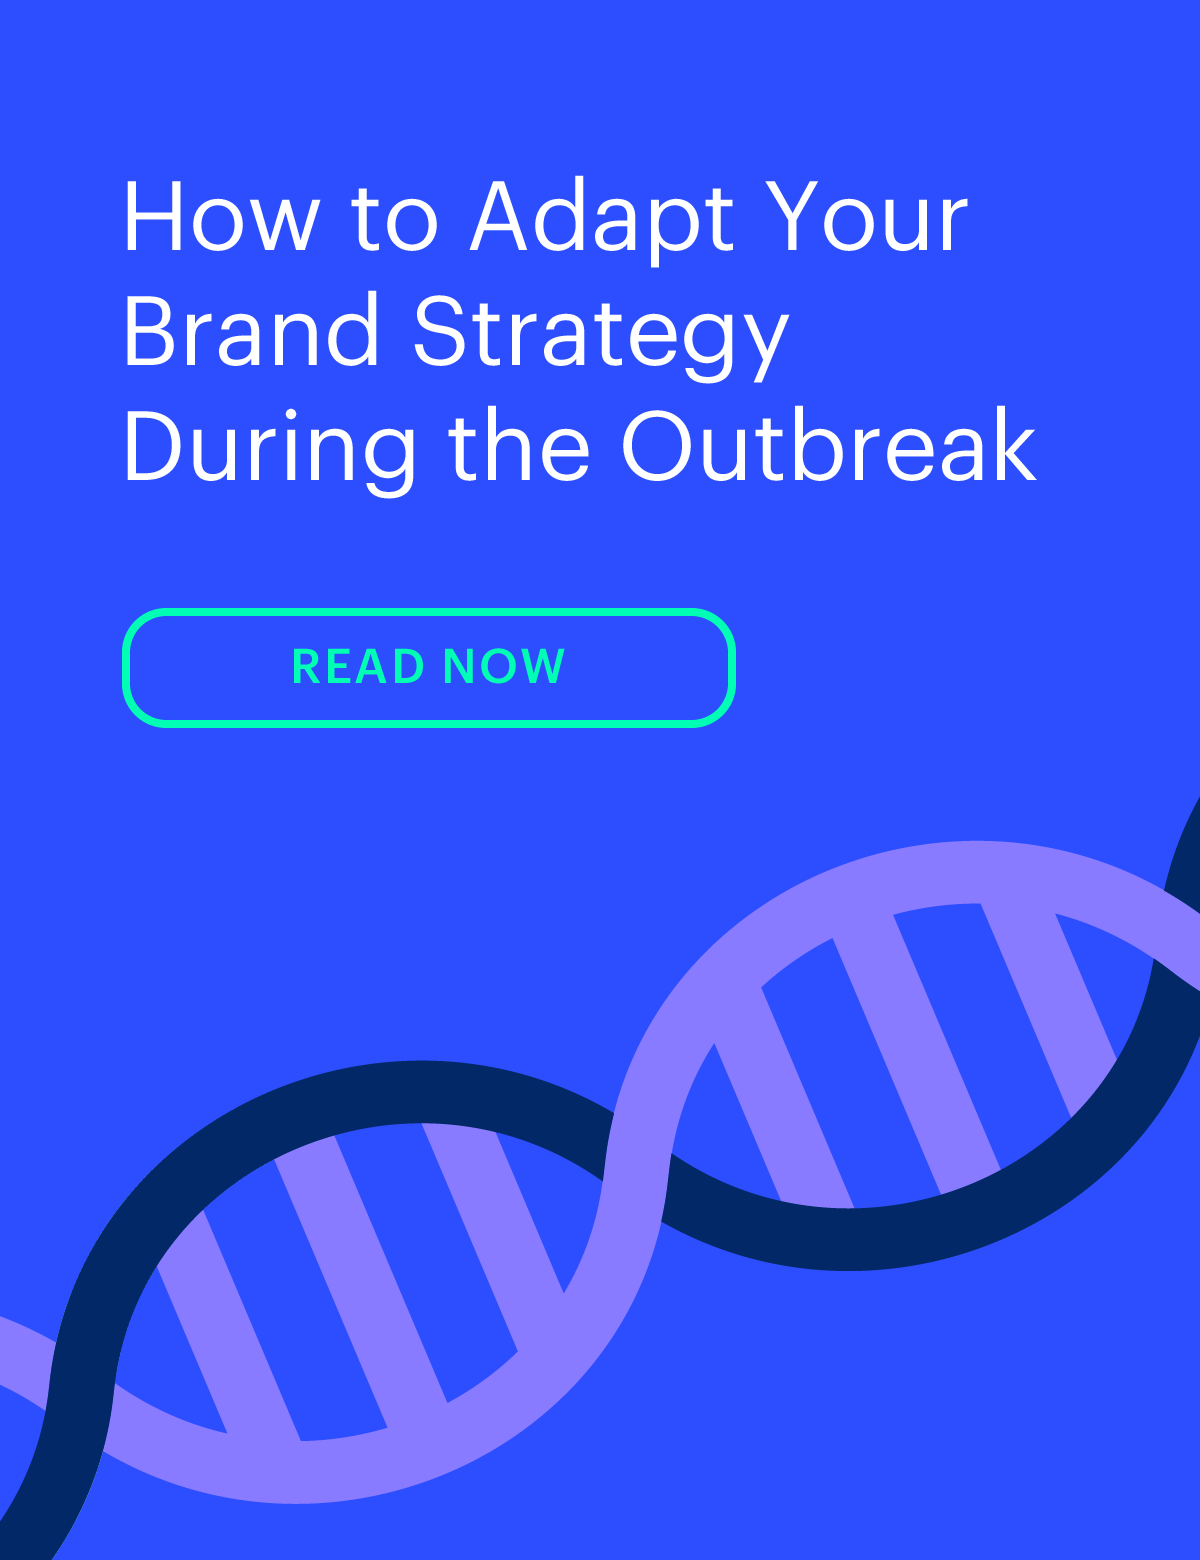 How to adapt your brand strategy during the outbreak